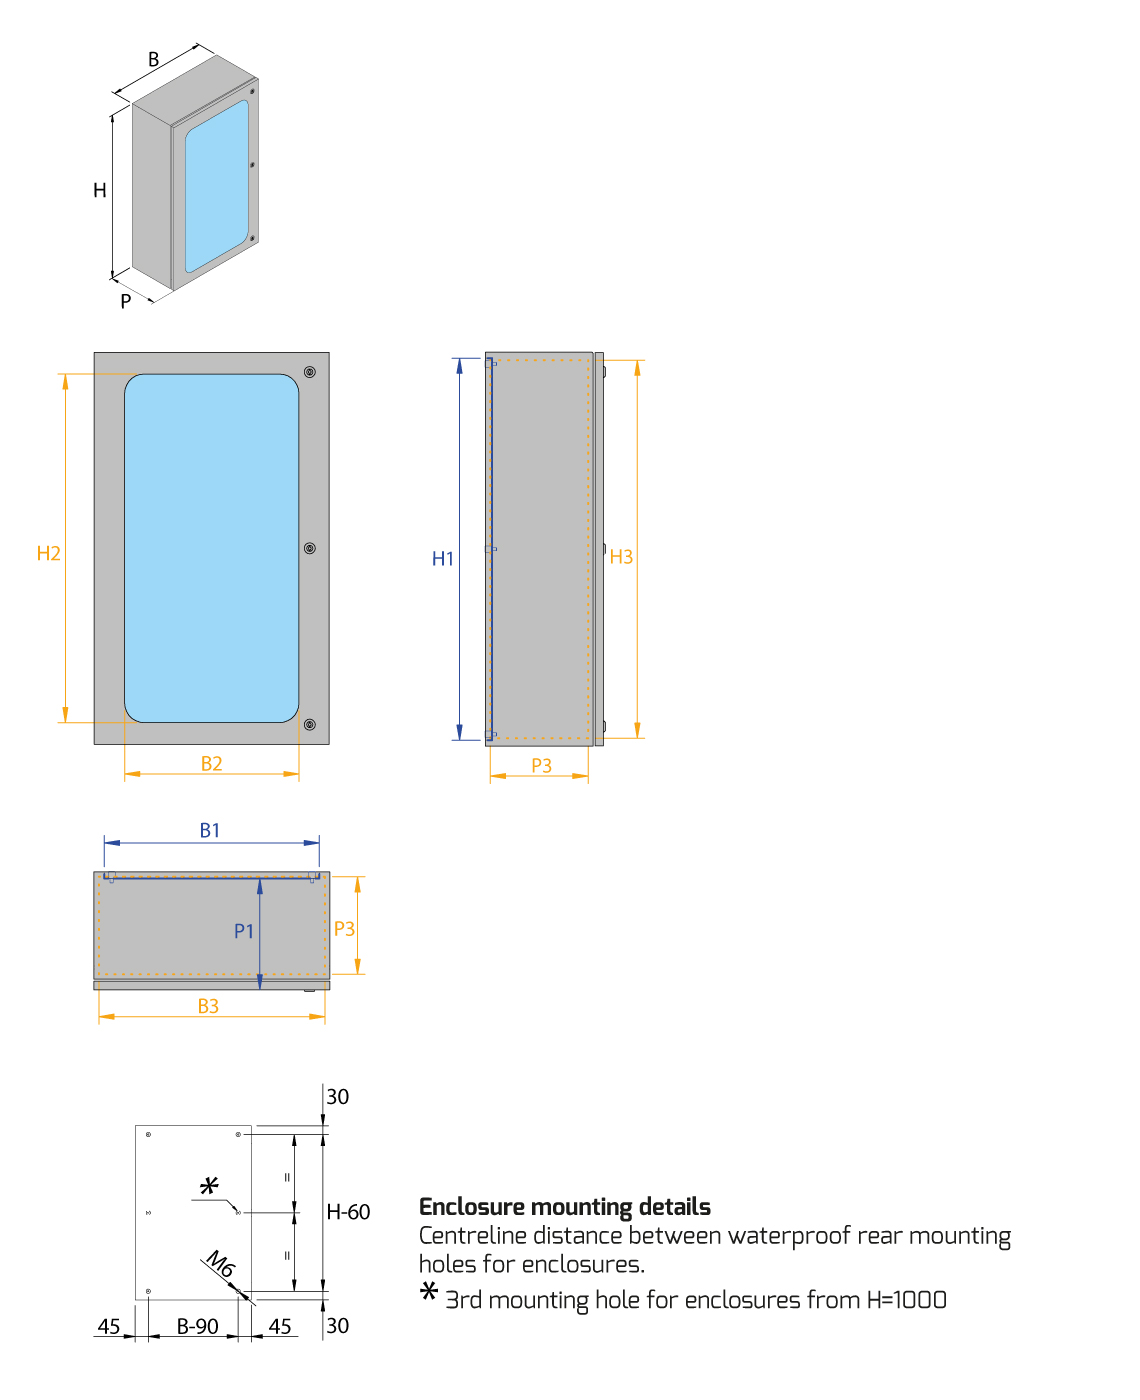 Technical drawing - CL enclosure